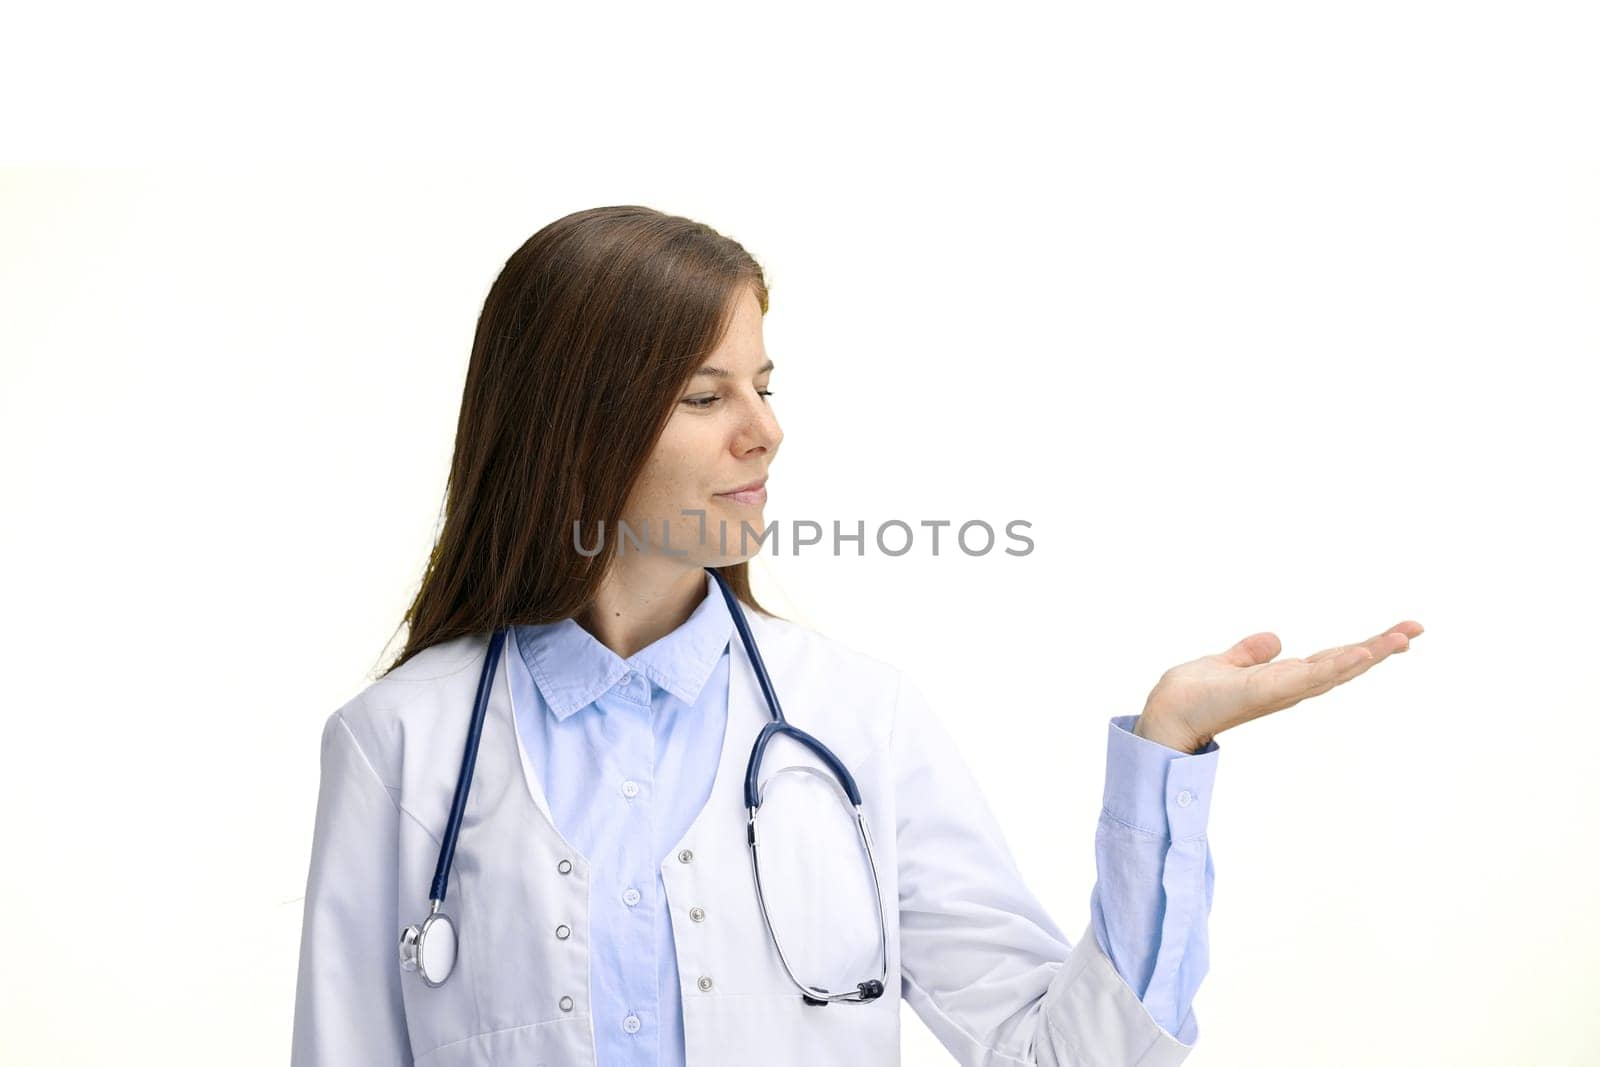 Female doctor, close-up, on a white background, pointing to the side.